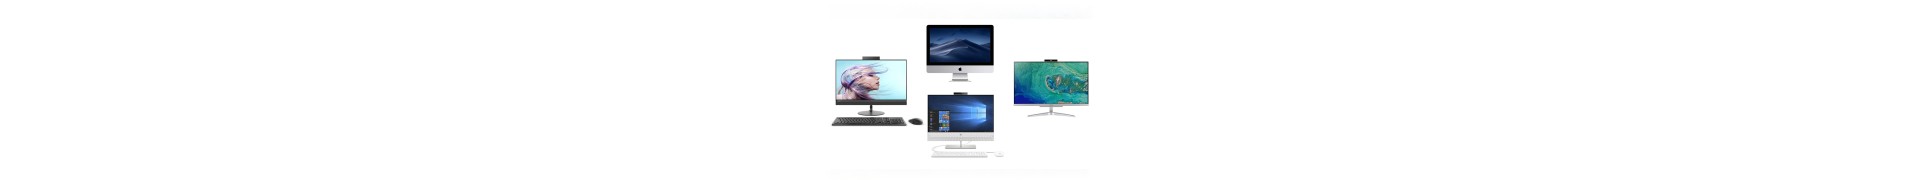 All in One (AiO)